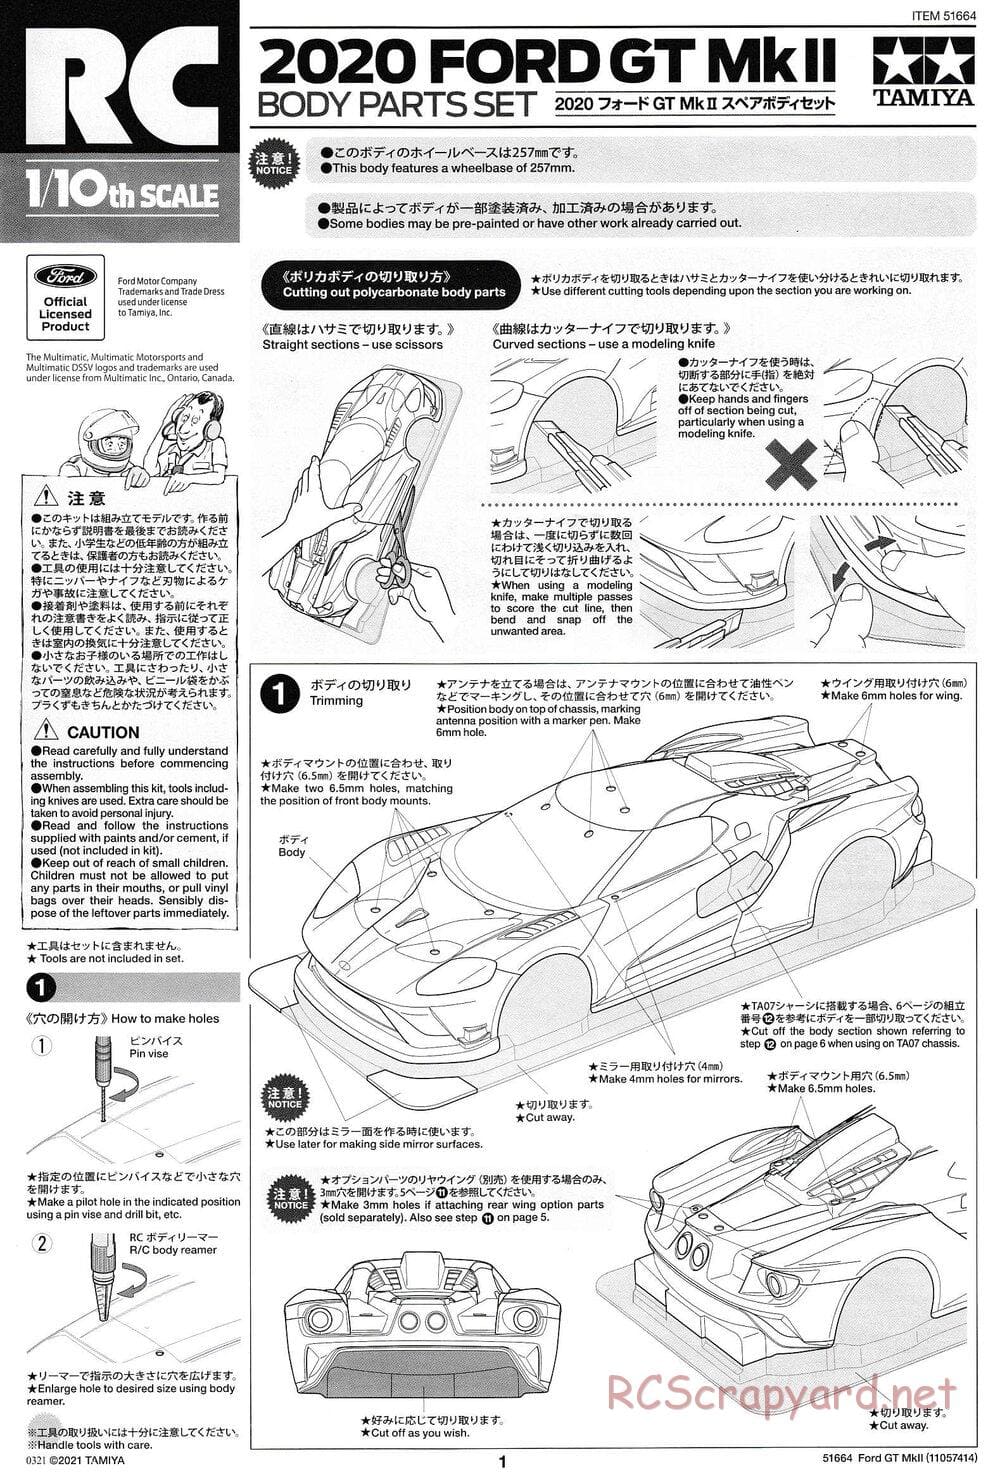 Tamiya - 2020 Ford GT Mk.II - TT-02 Chassis - Body Manual - Page 1